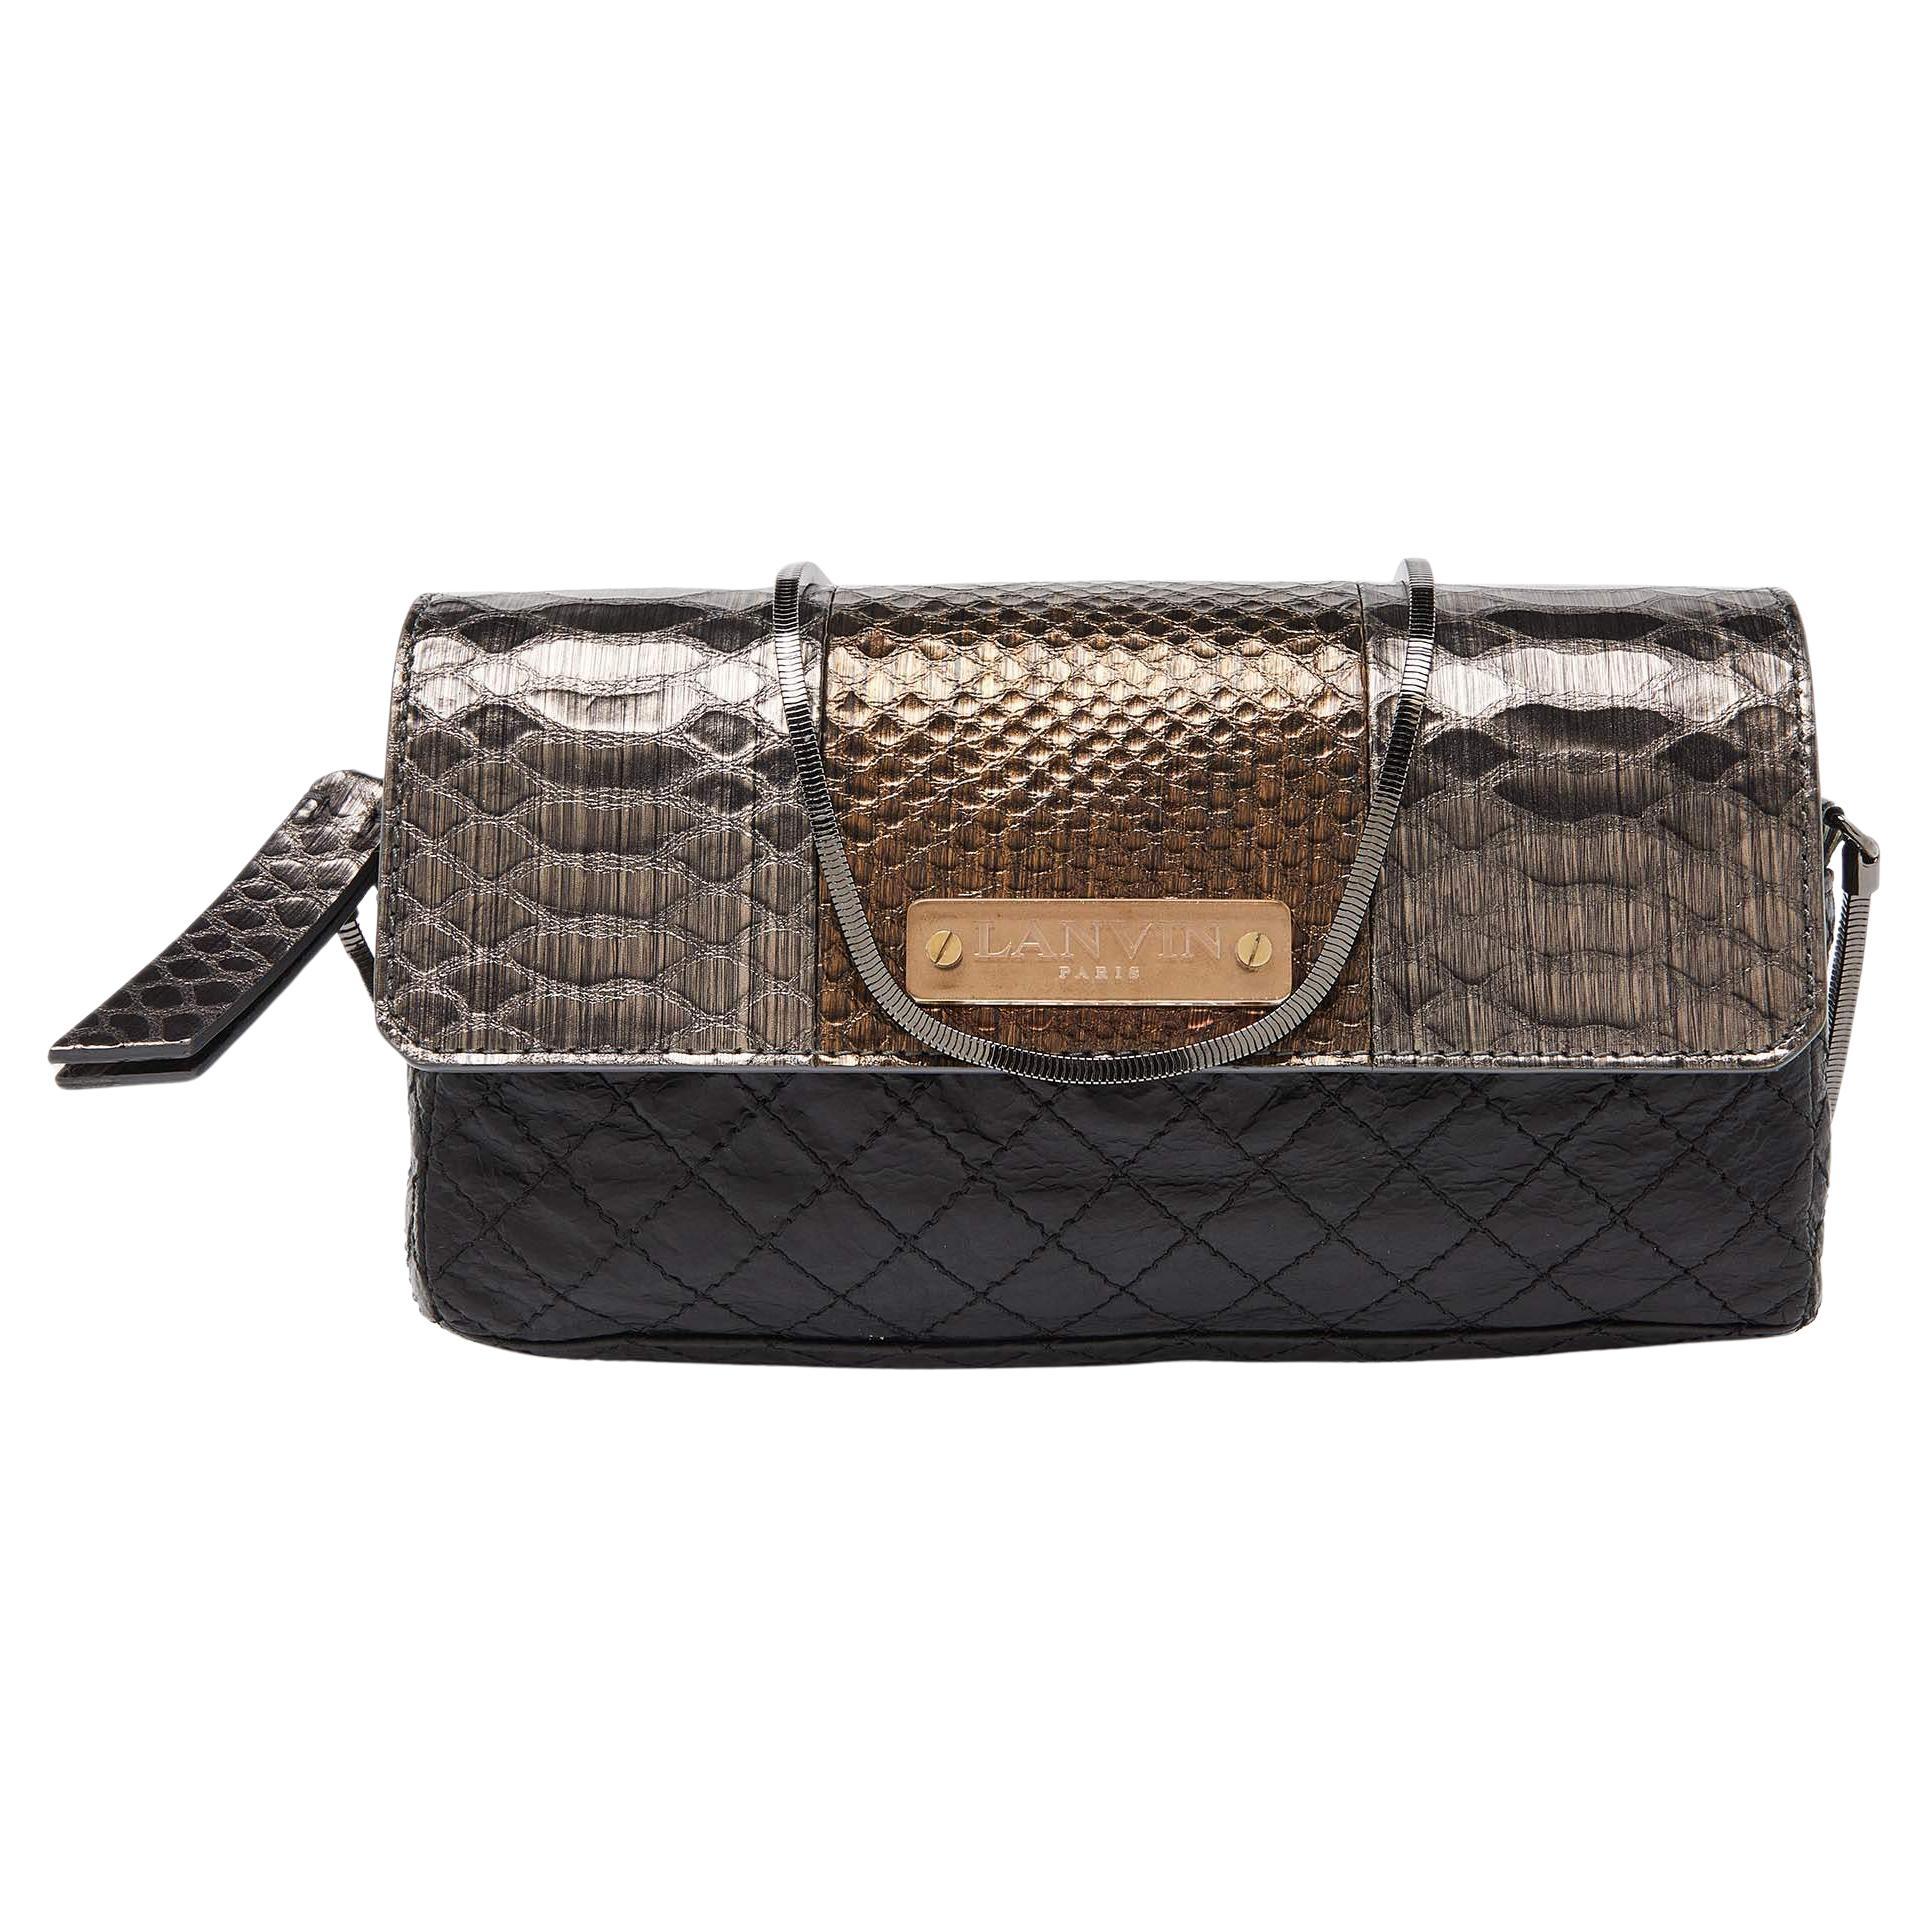 Lanvin Black/Gold Quilted Leather and Python Embossed Leather Flap Crossbody Bag For Sale